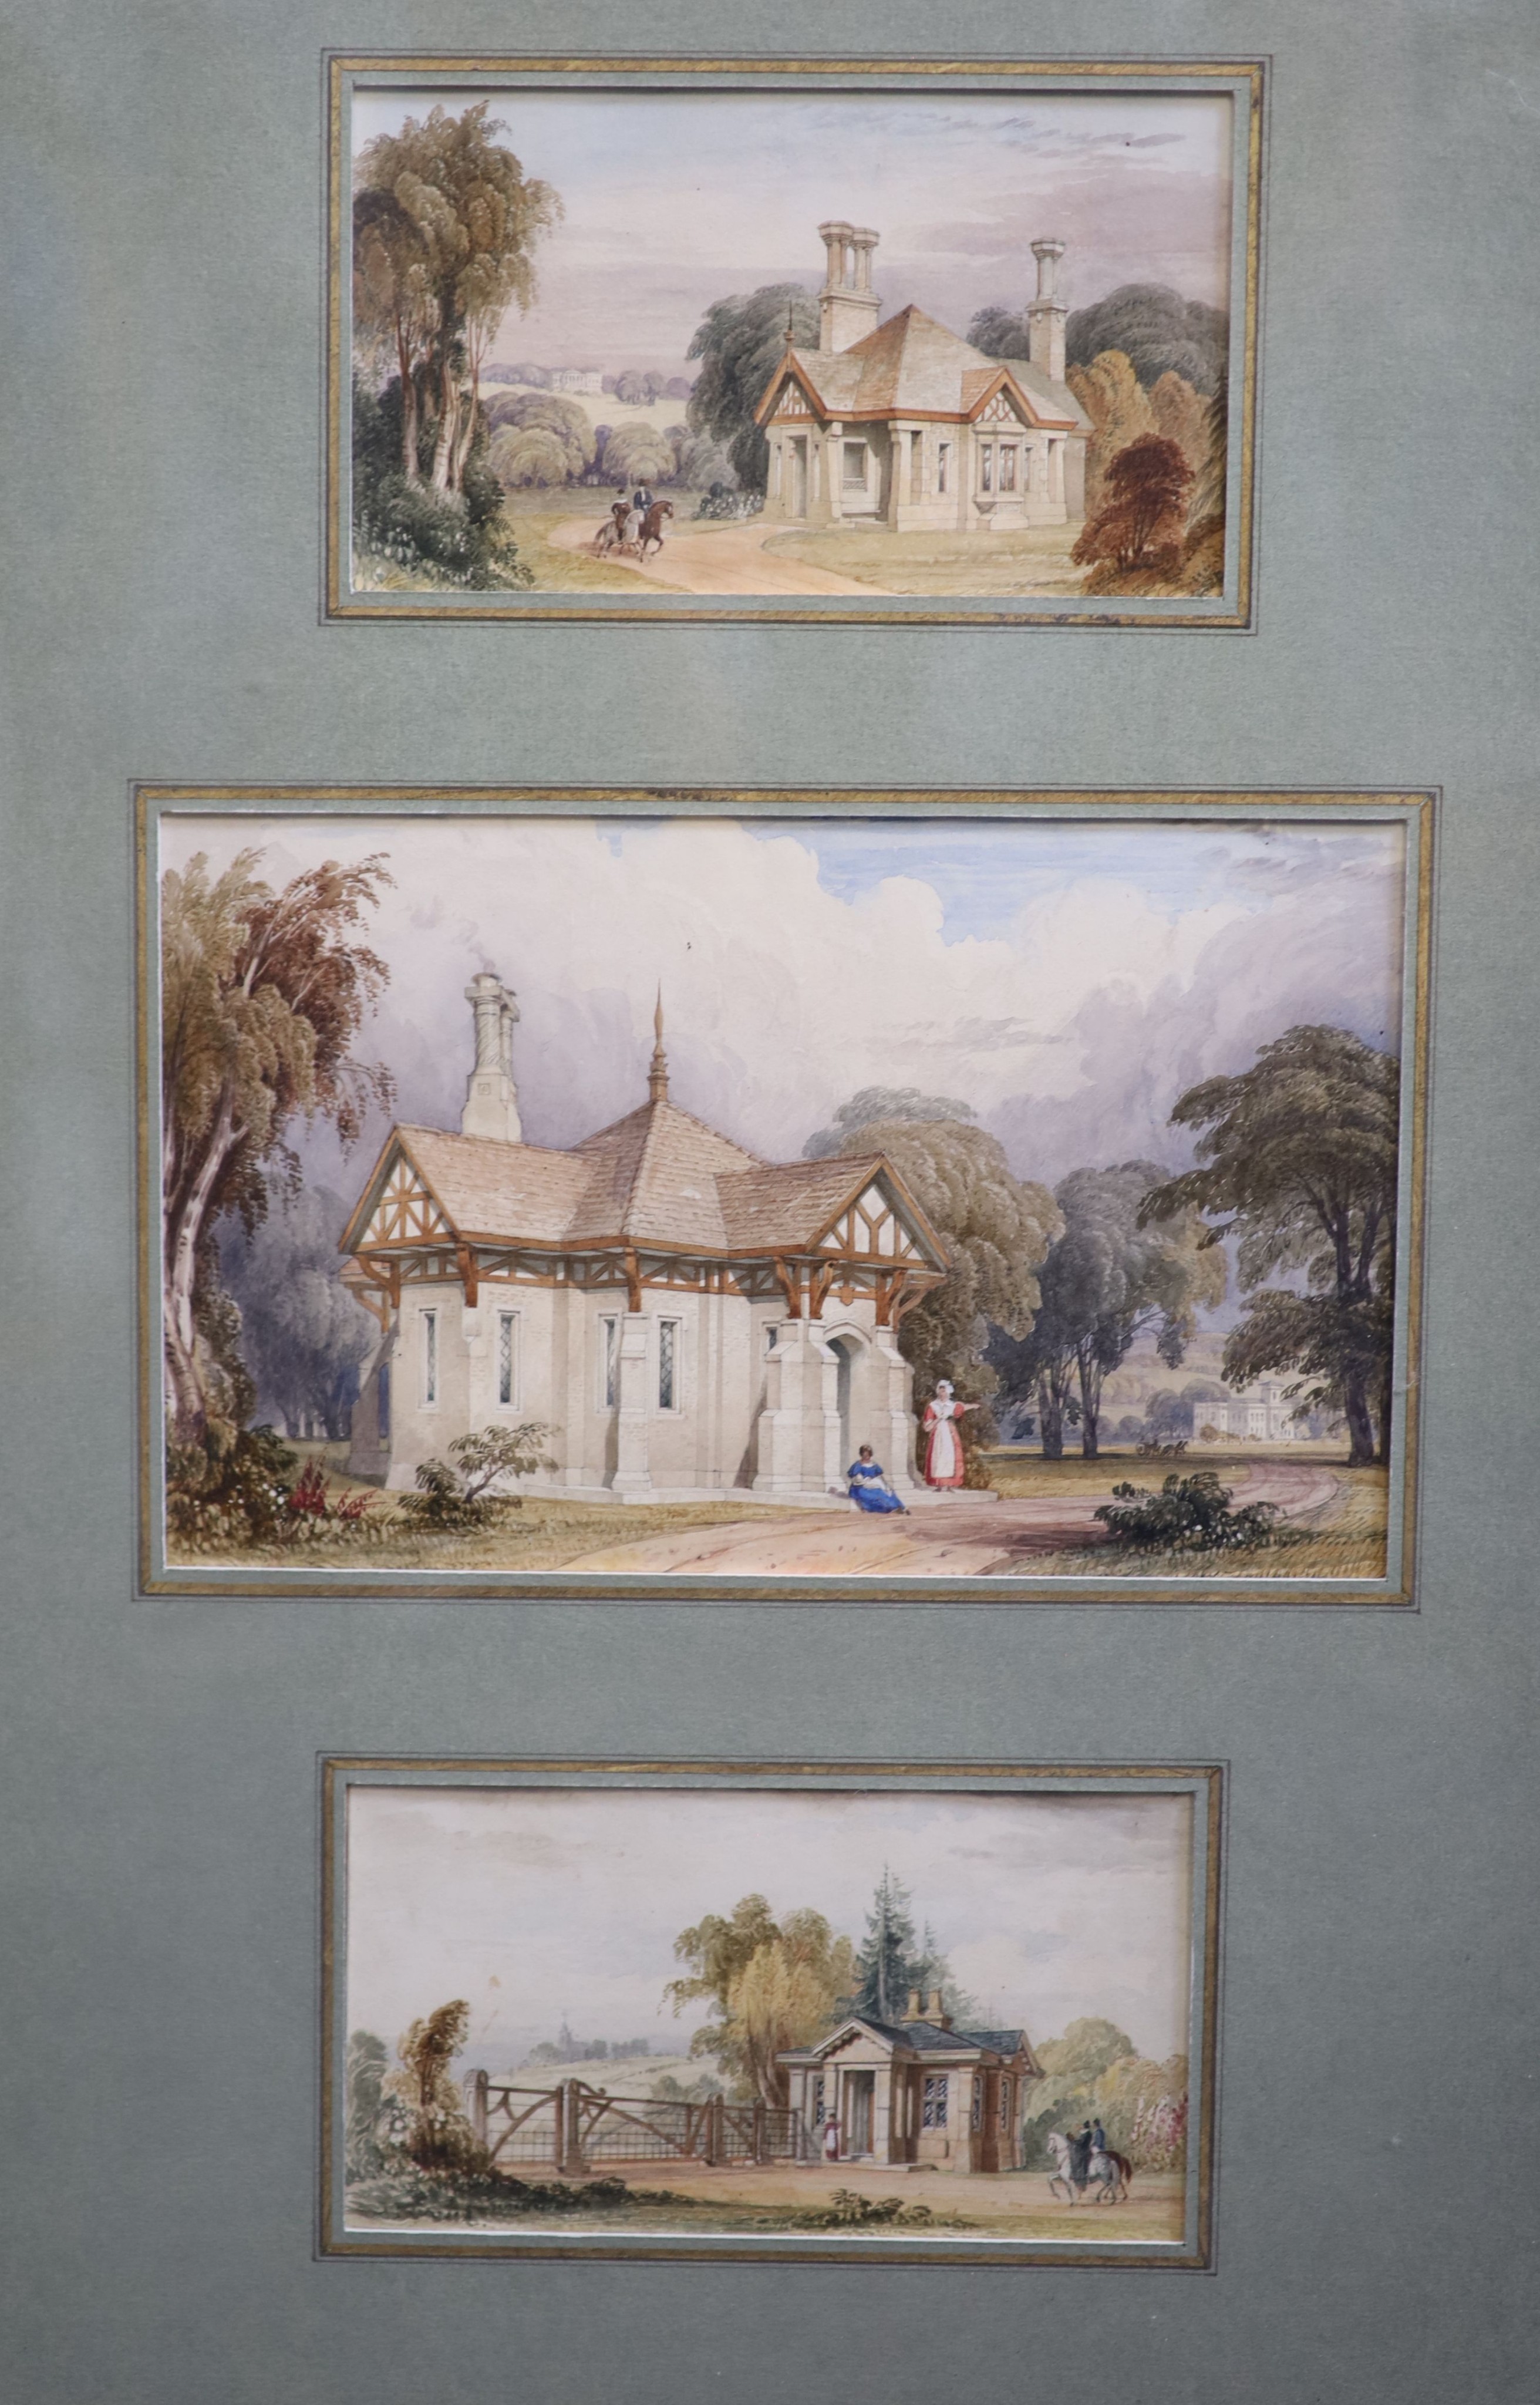 Francis Goodwin (1784-1835), Designs for Greek Revival and Rustic Country Houses, six watercolour drawings on paper, 16 x 26cm and 10 x 18cm in two frames